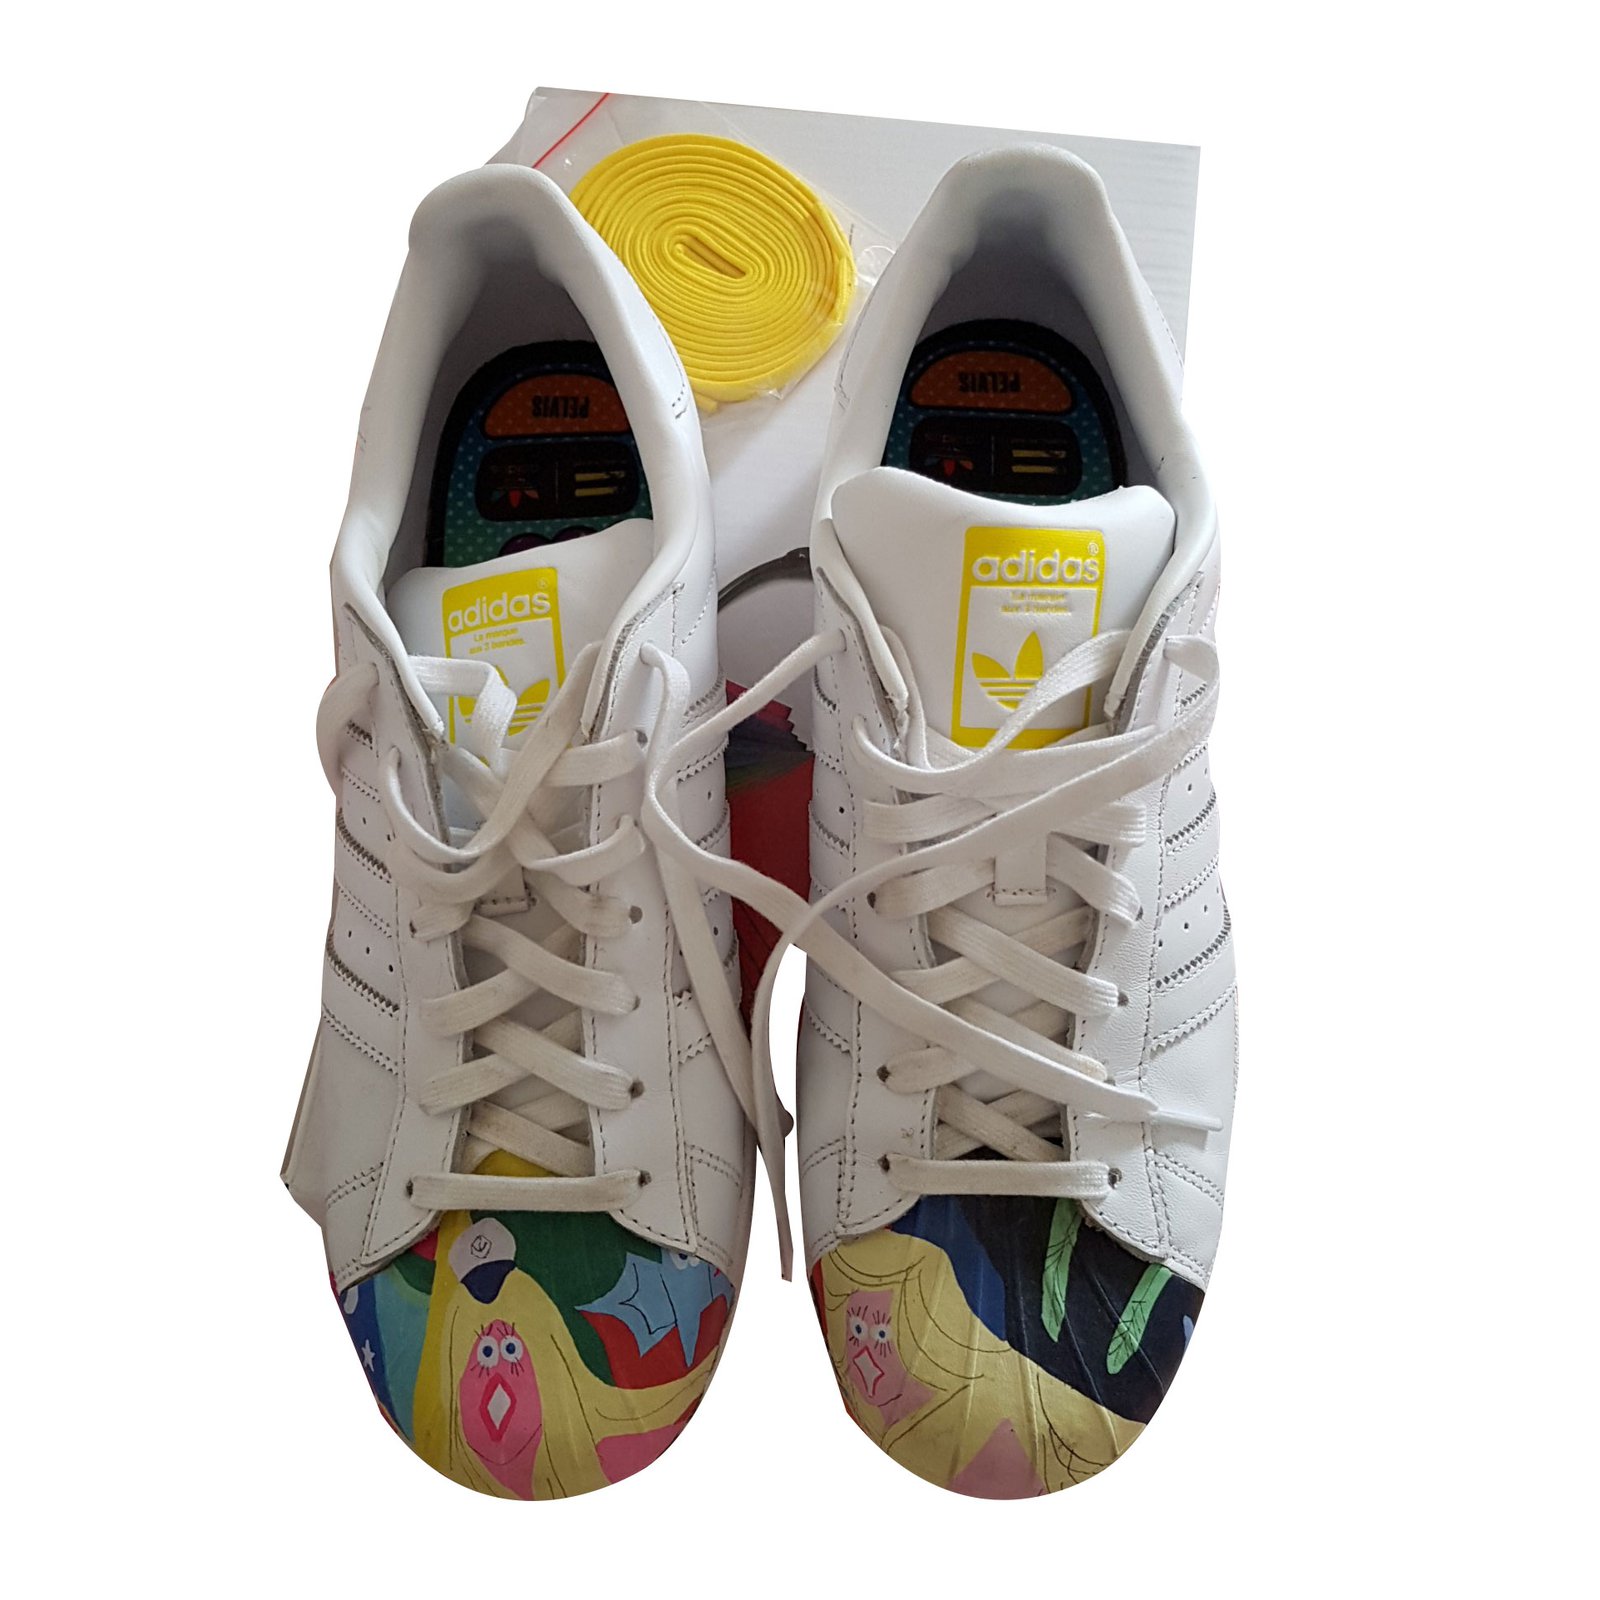 Hedendaags Adidas Pharrell Williams Superstar Sneakers Leather White,Multiple PO-78